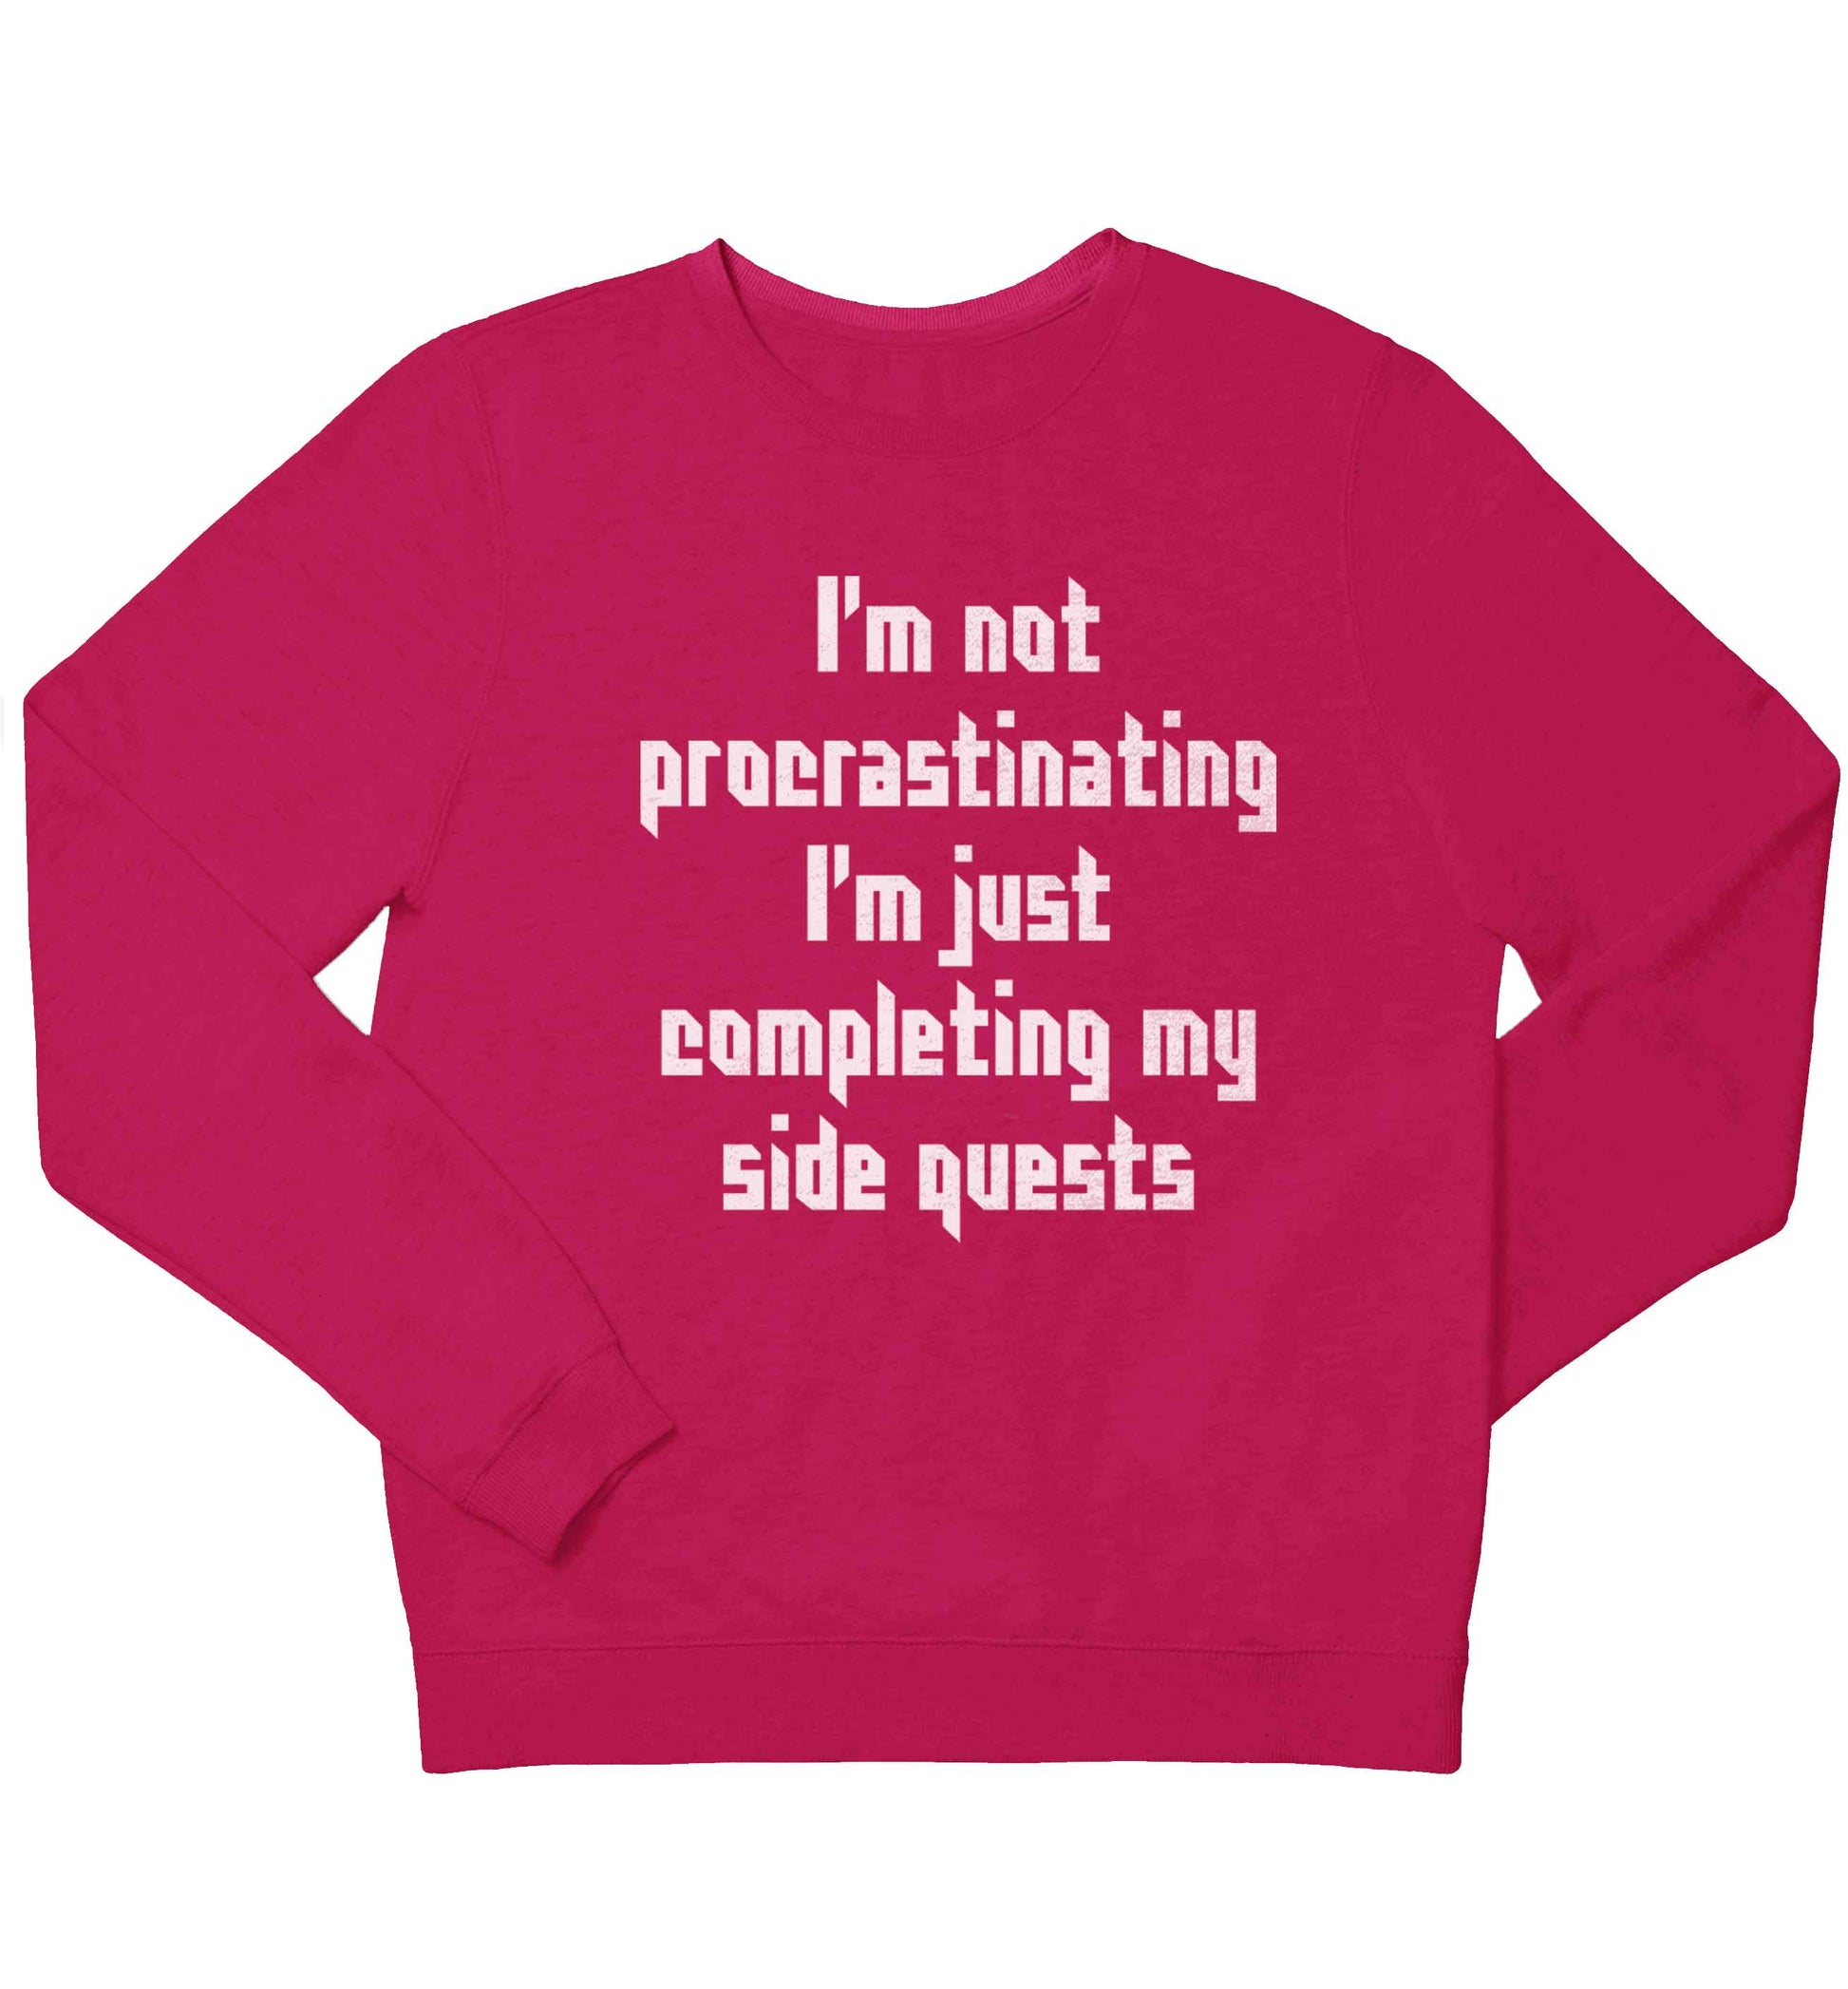 I'm not procrastinating I'm just completing my side quests children's pink sweater 12-13 Years